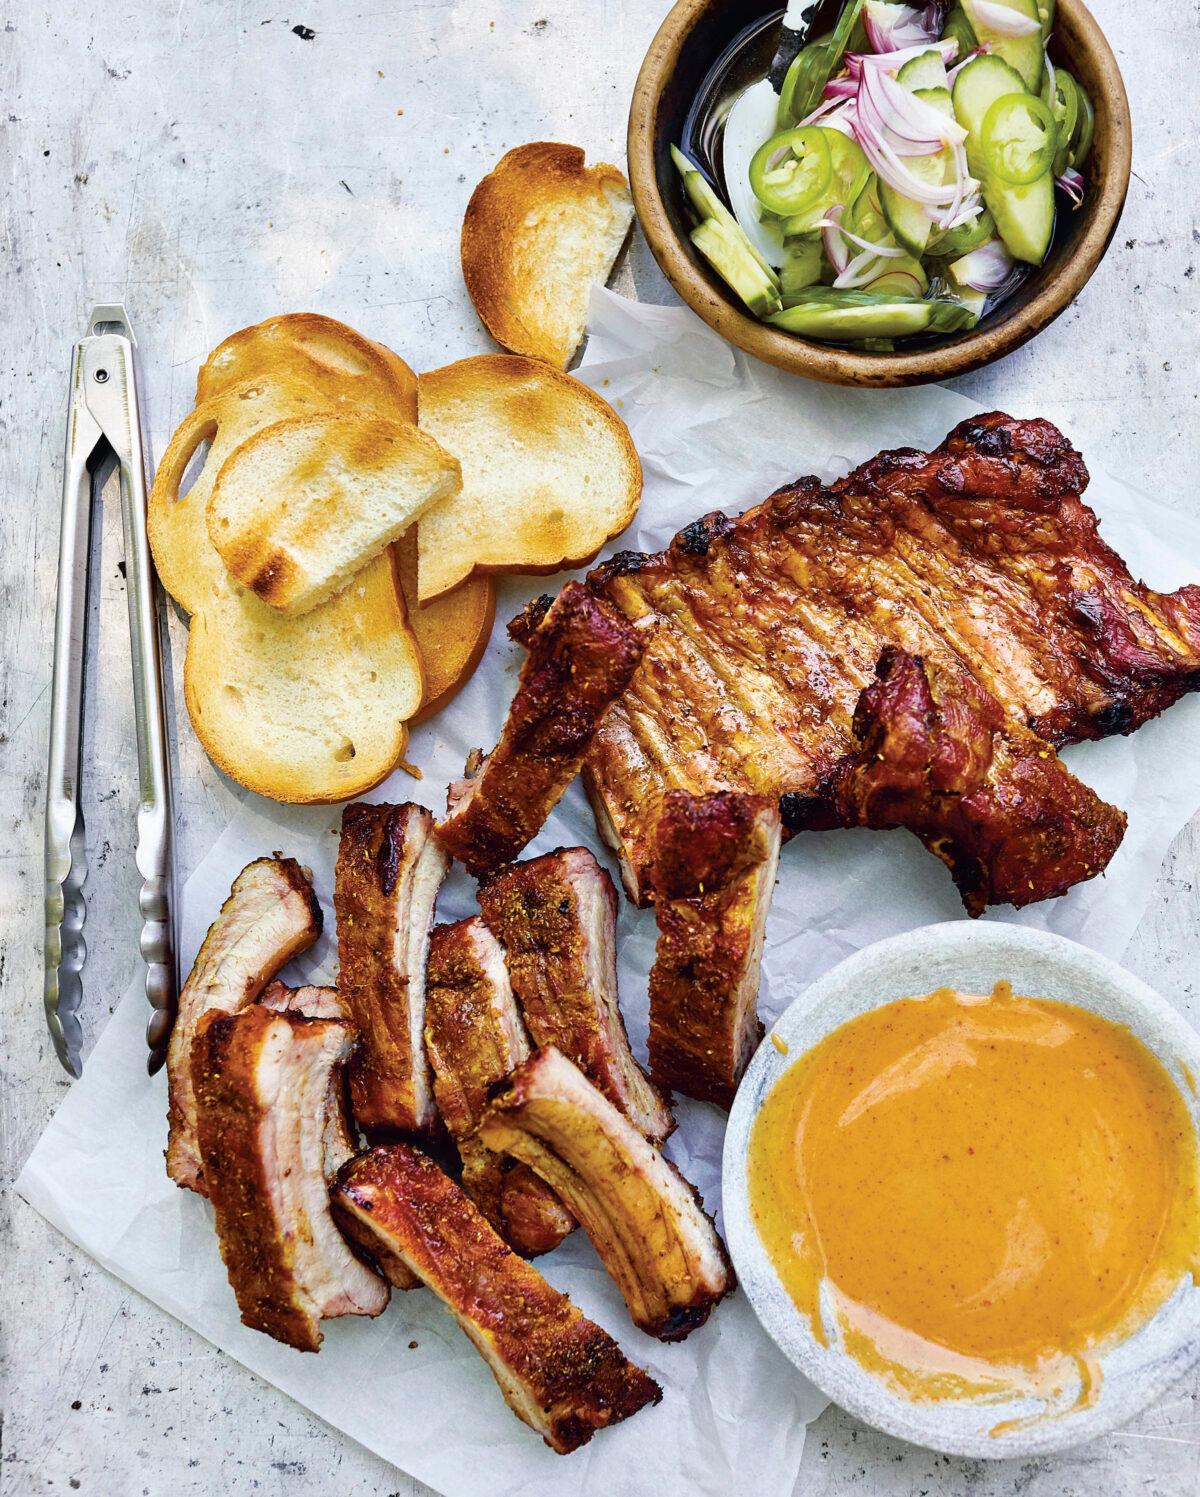 Satay of baby back ribs, Leela Punyaratabandhu's low-and-slow take on Thailand's ubiquitous pork satay: "Think of the ribs as pork meat that nature has already threaded onto skewers." (Photo by David Loftus)